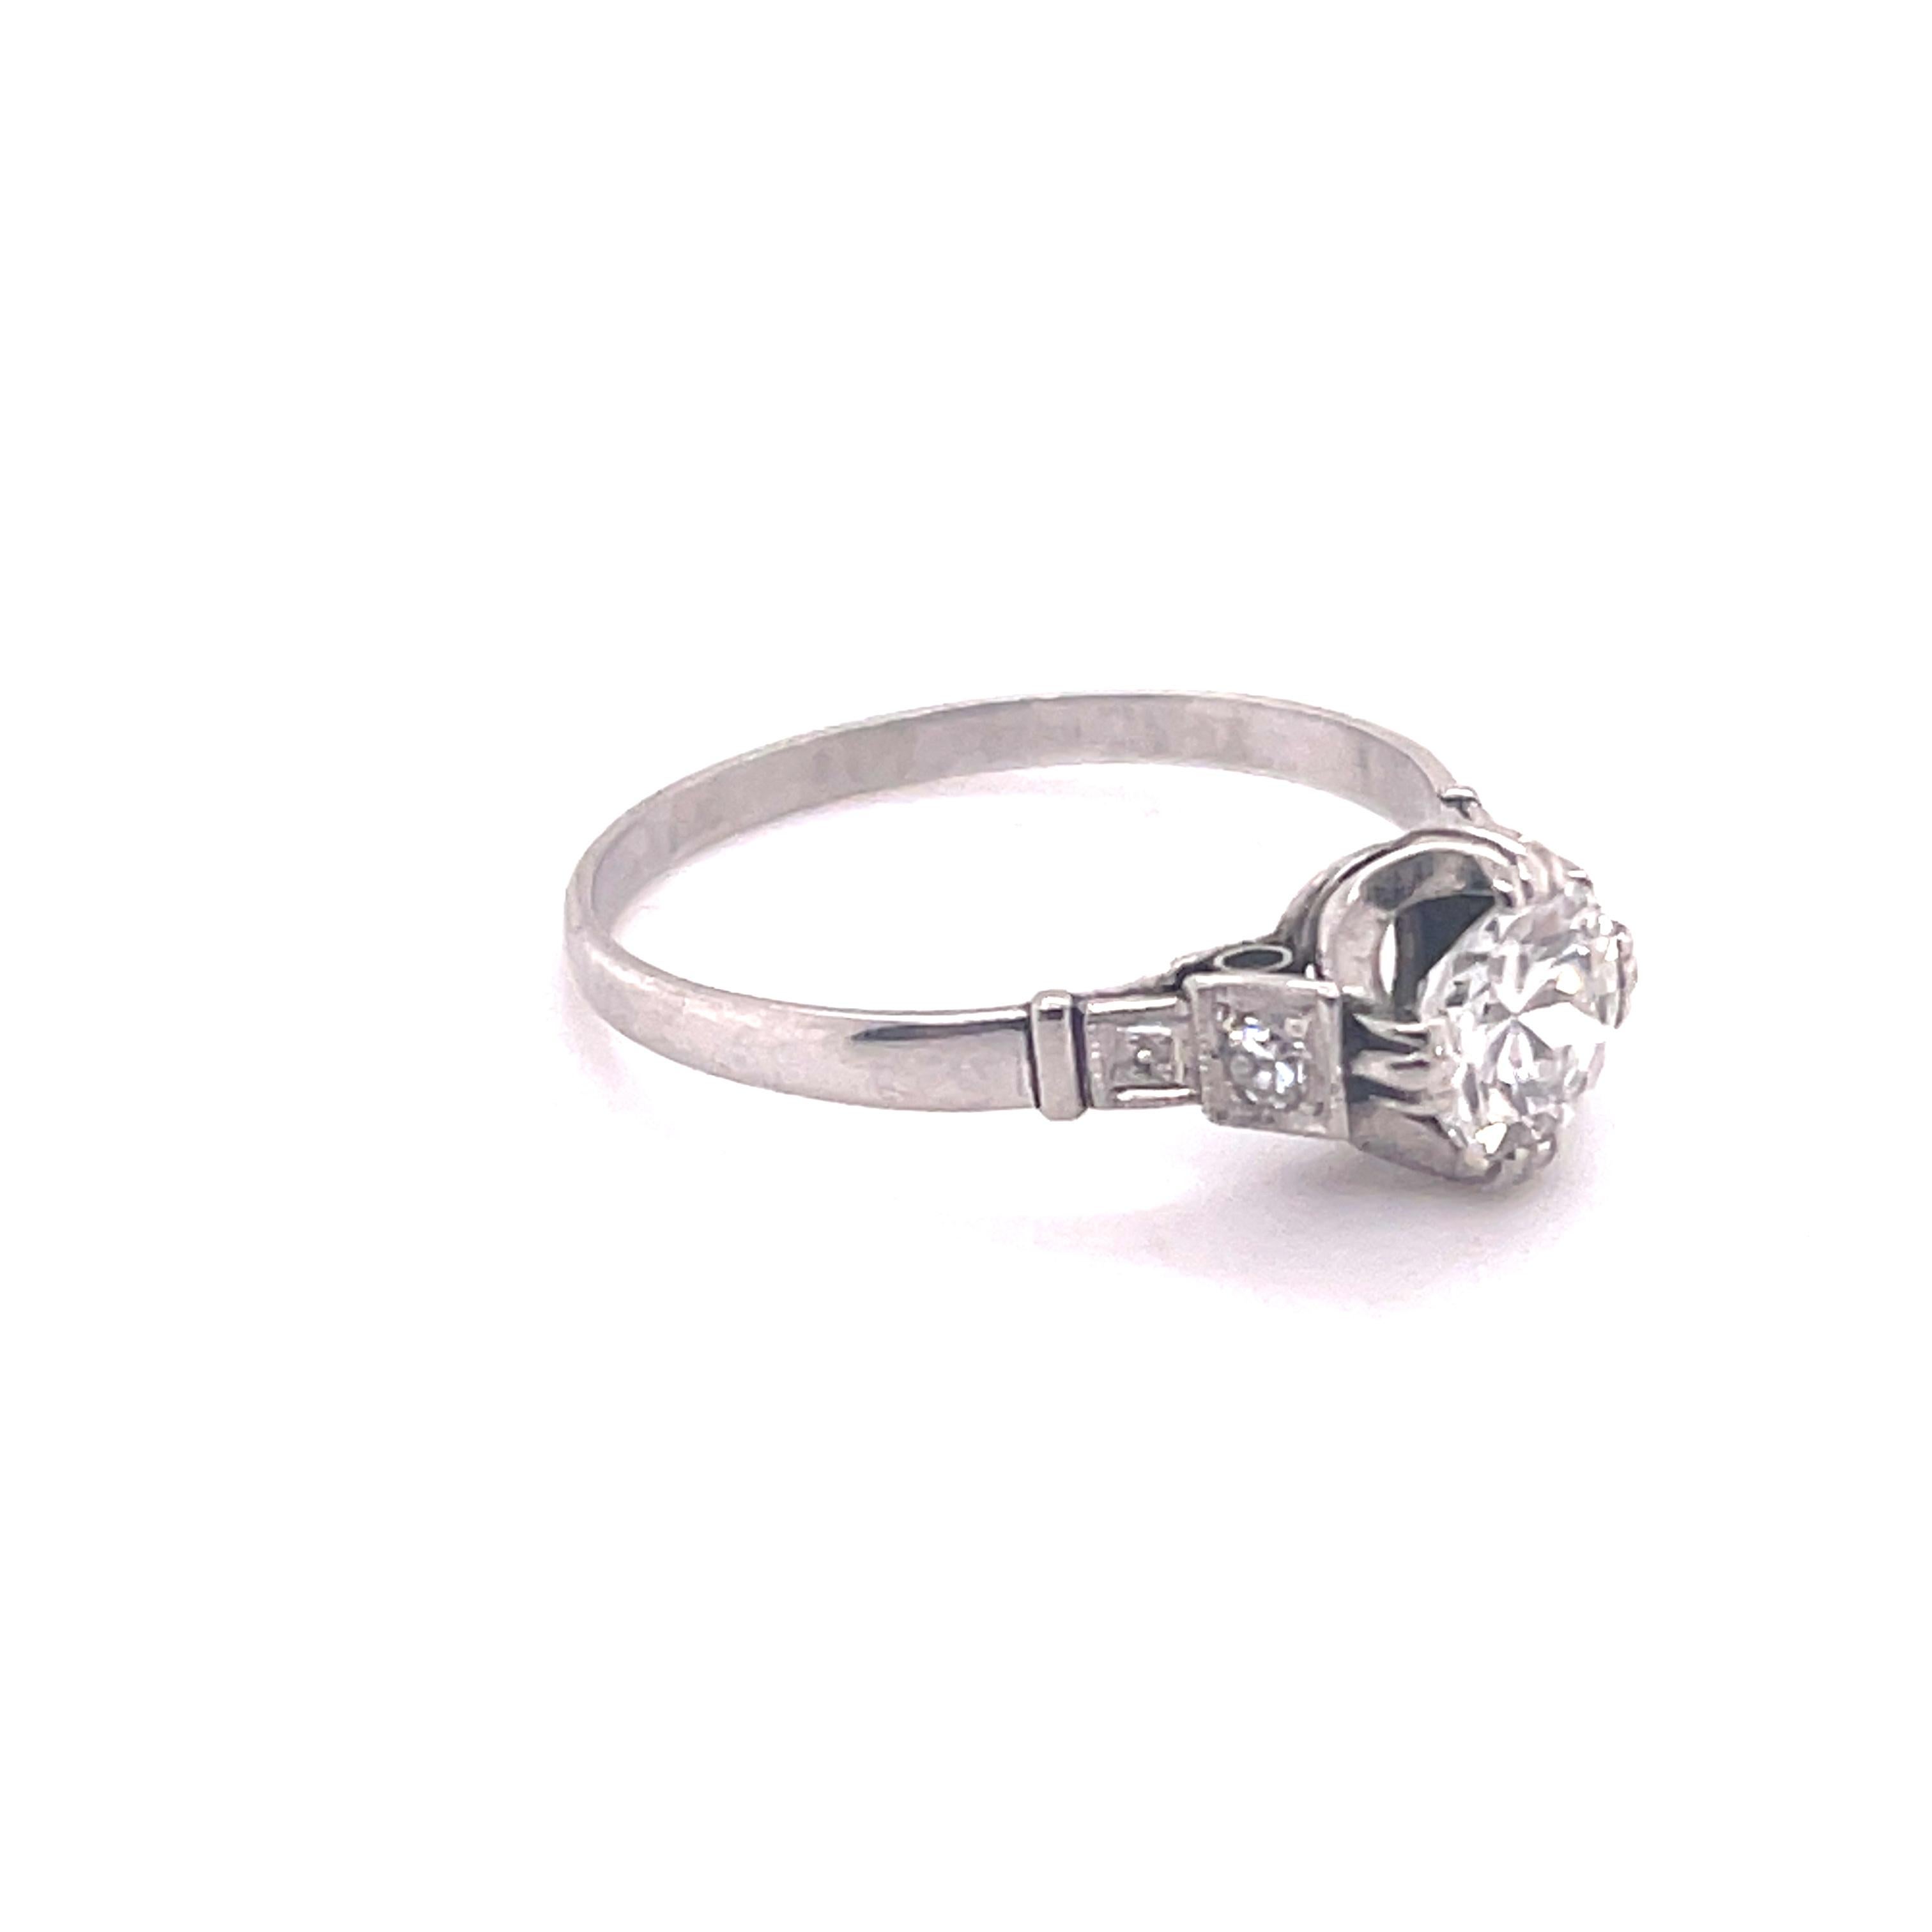 Gender: Ladies
Size: 6.5 US
Total Weight: 2.4 grams
Purity: Platinum
Shank type: Half Round
Condition: Pre-owned in excellent condition. Quality and Durability was checked by professional jewelers.

Double-Prong Set in Platinum with:
One (1) early